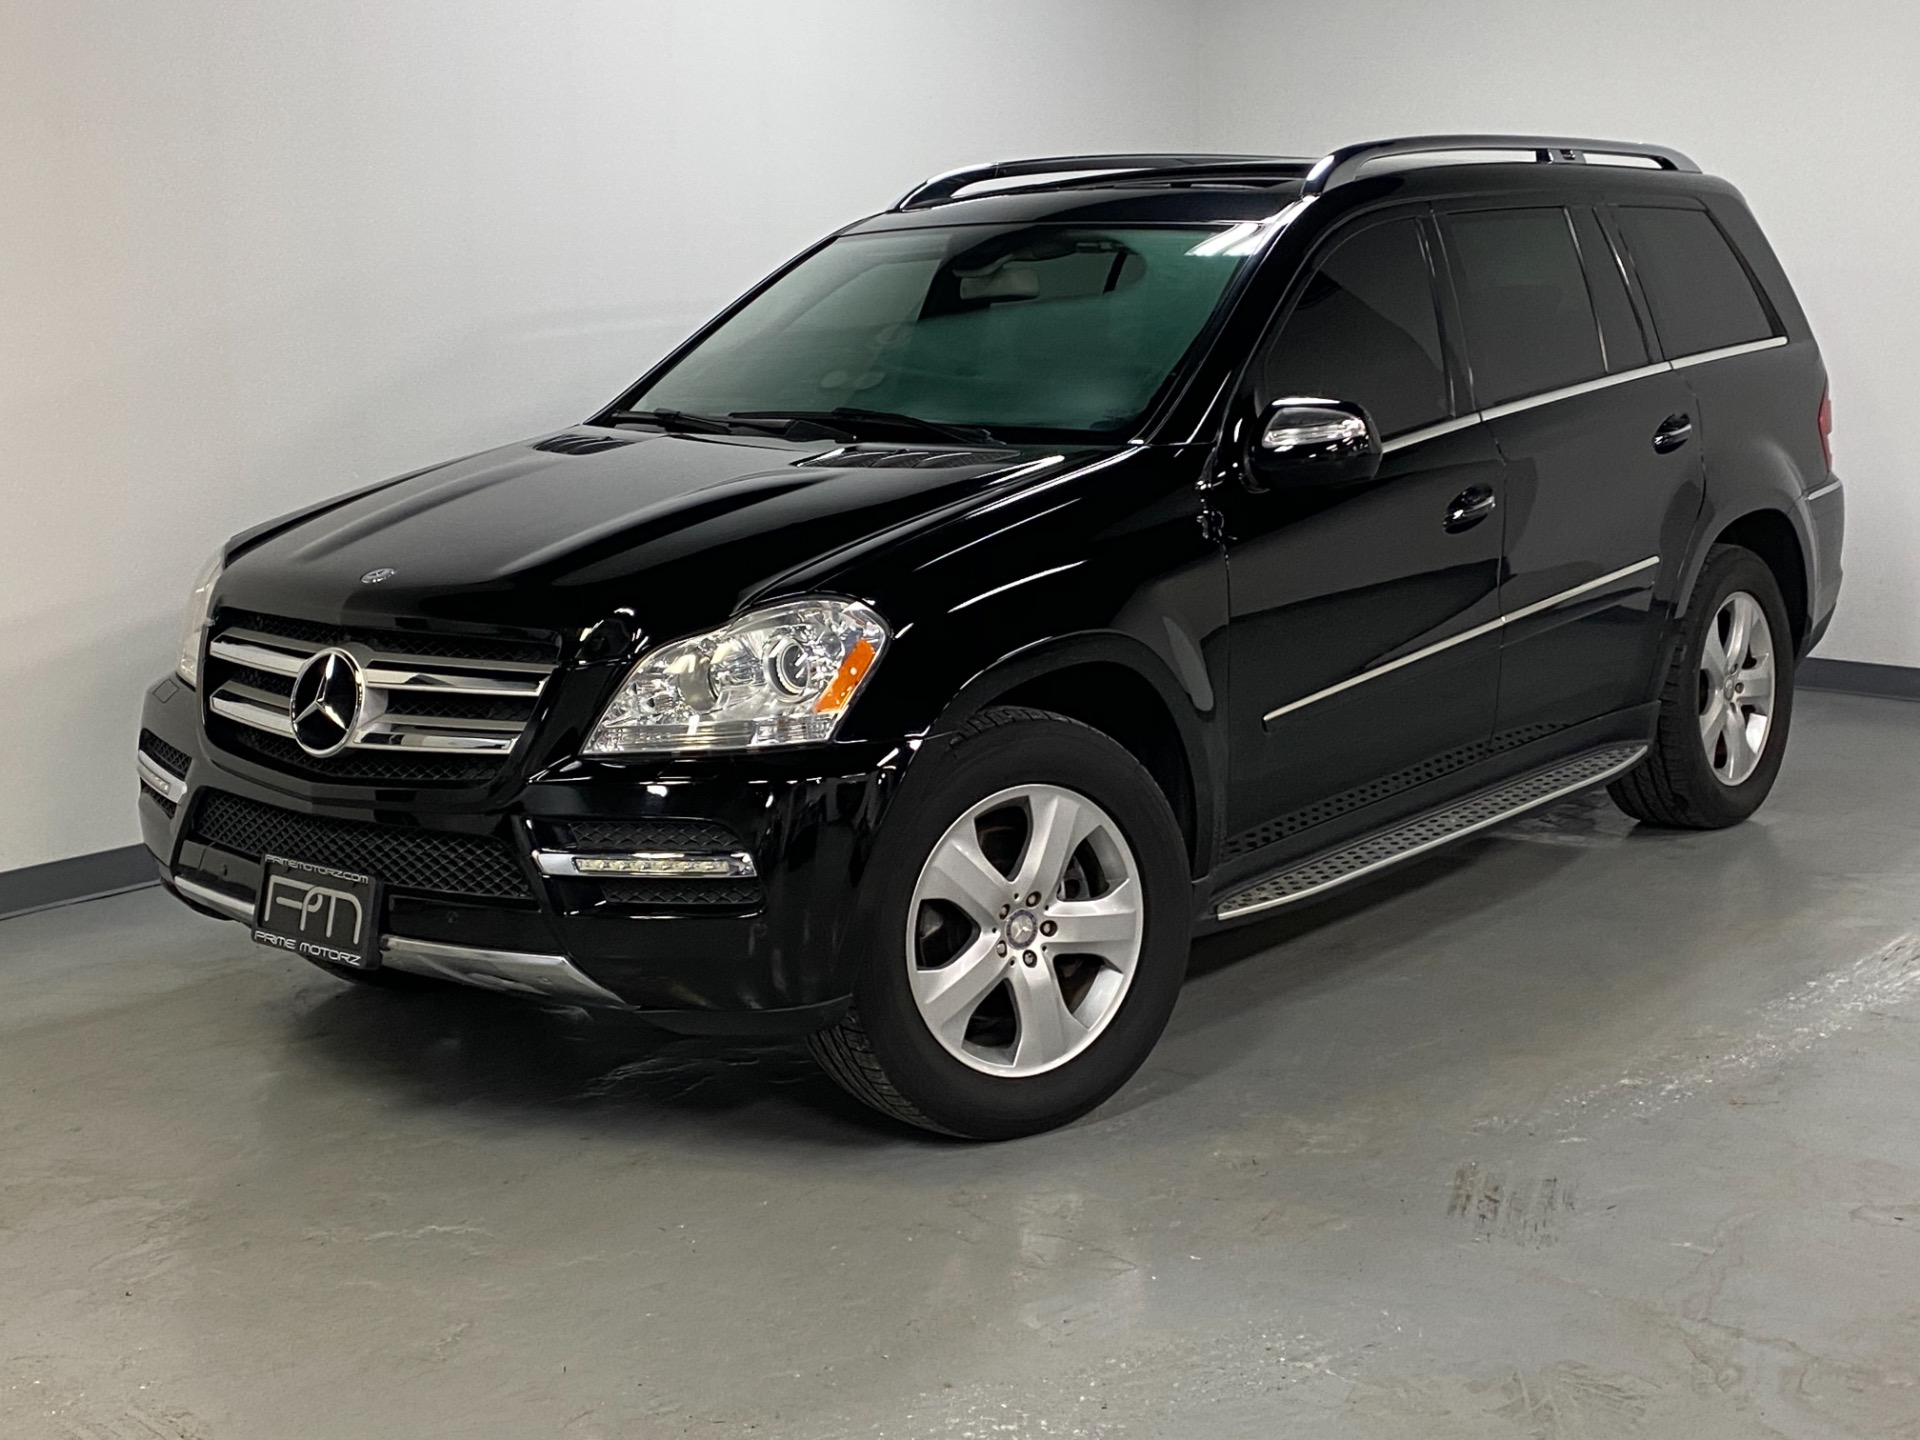 Used 2010 Black Mercedes-Benz GL-Class GL450 4MATIC GL 450 4MATIC For Sale  (Sold) | Prime Motorz Stock #3331